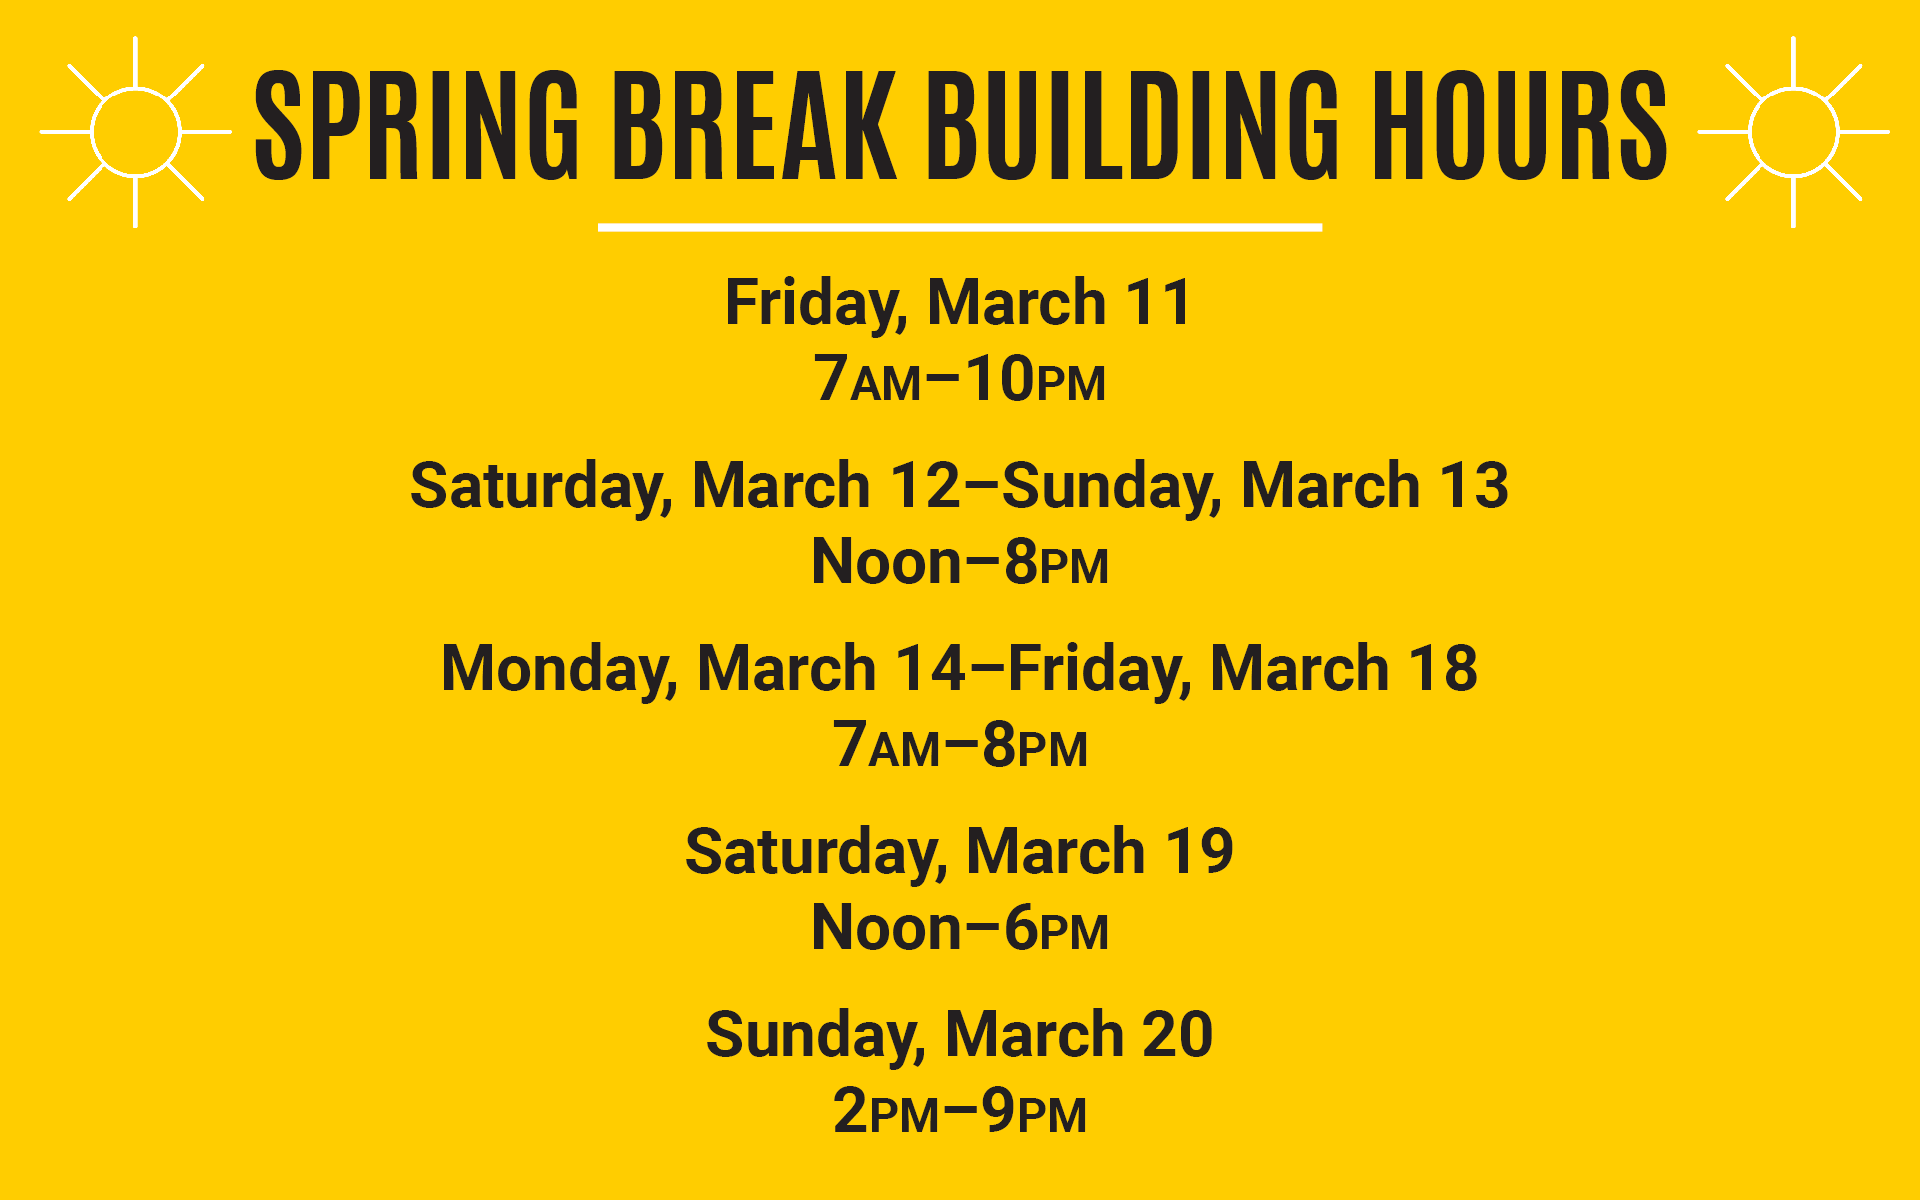 Spring Break Building Hours. March 11: 7am-10pm, March 12 & 13: noon-8pm, March 14-18: 7am-8pm, March 19: noon-6pm, March 20: 2pm-9pm.